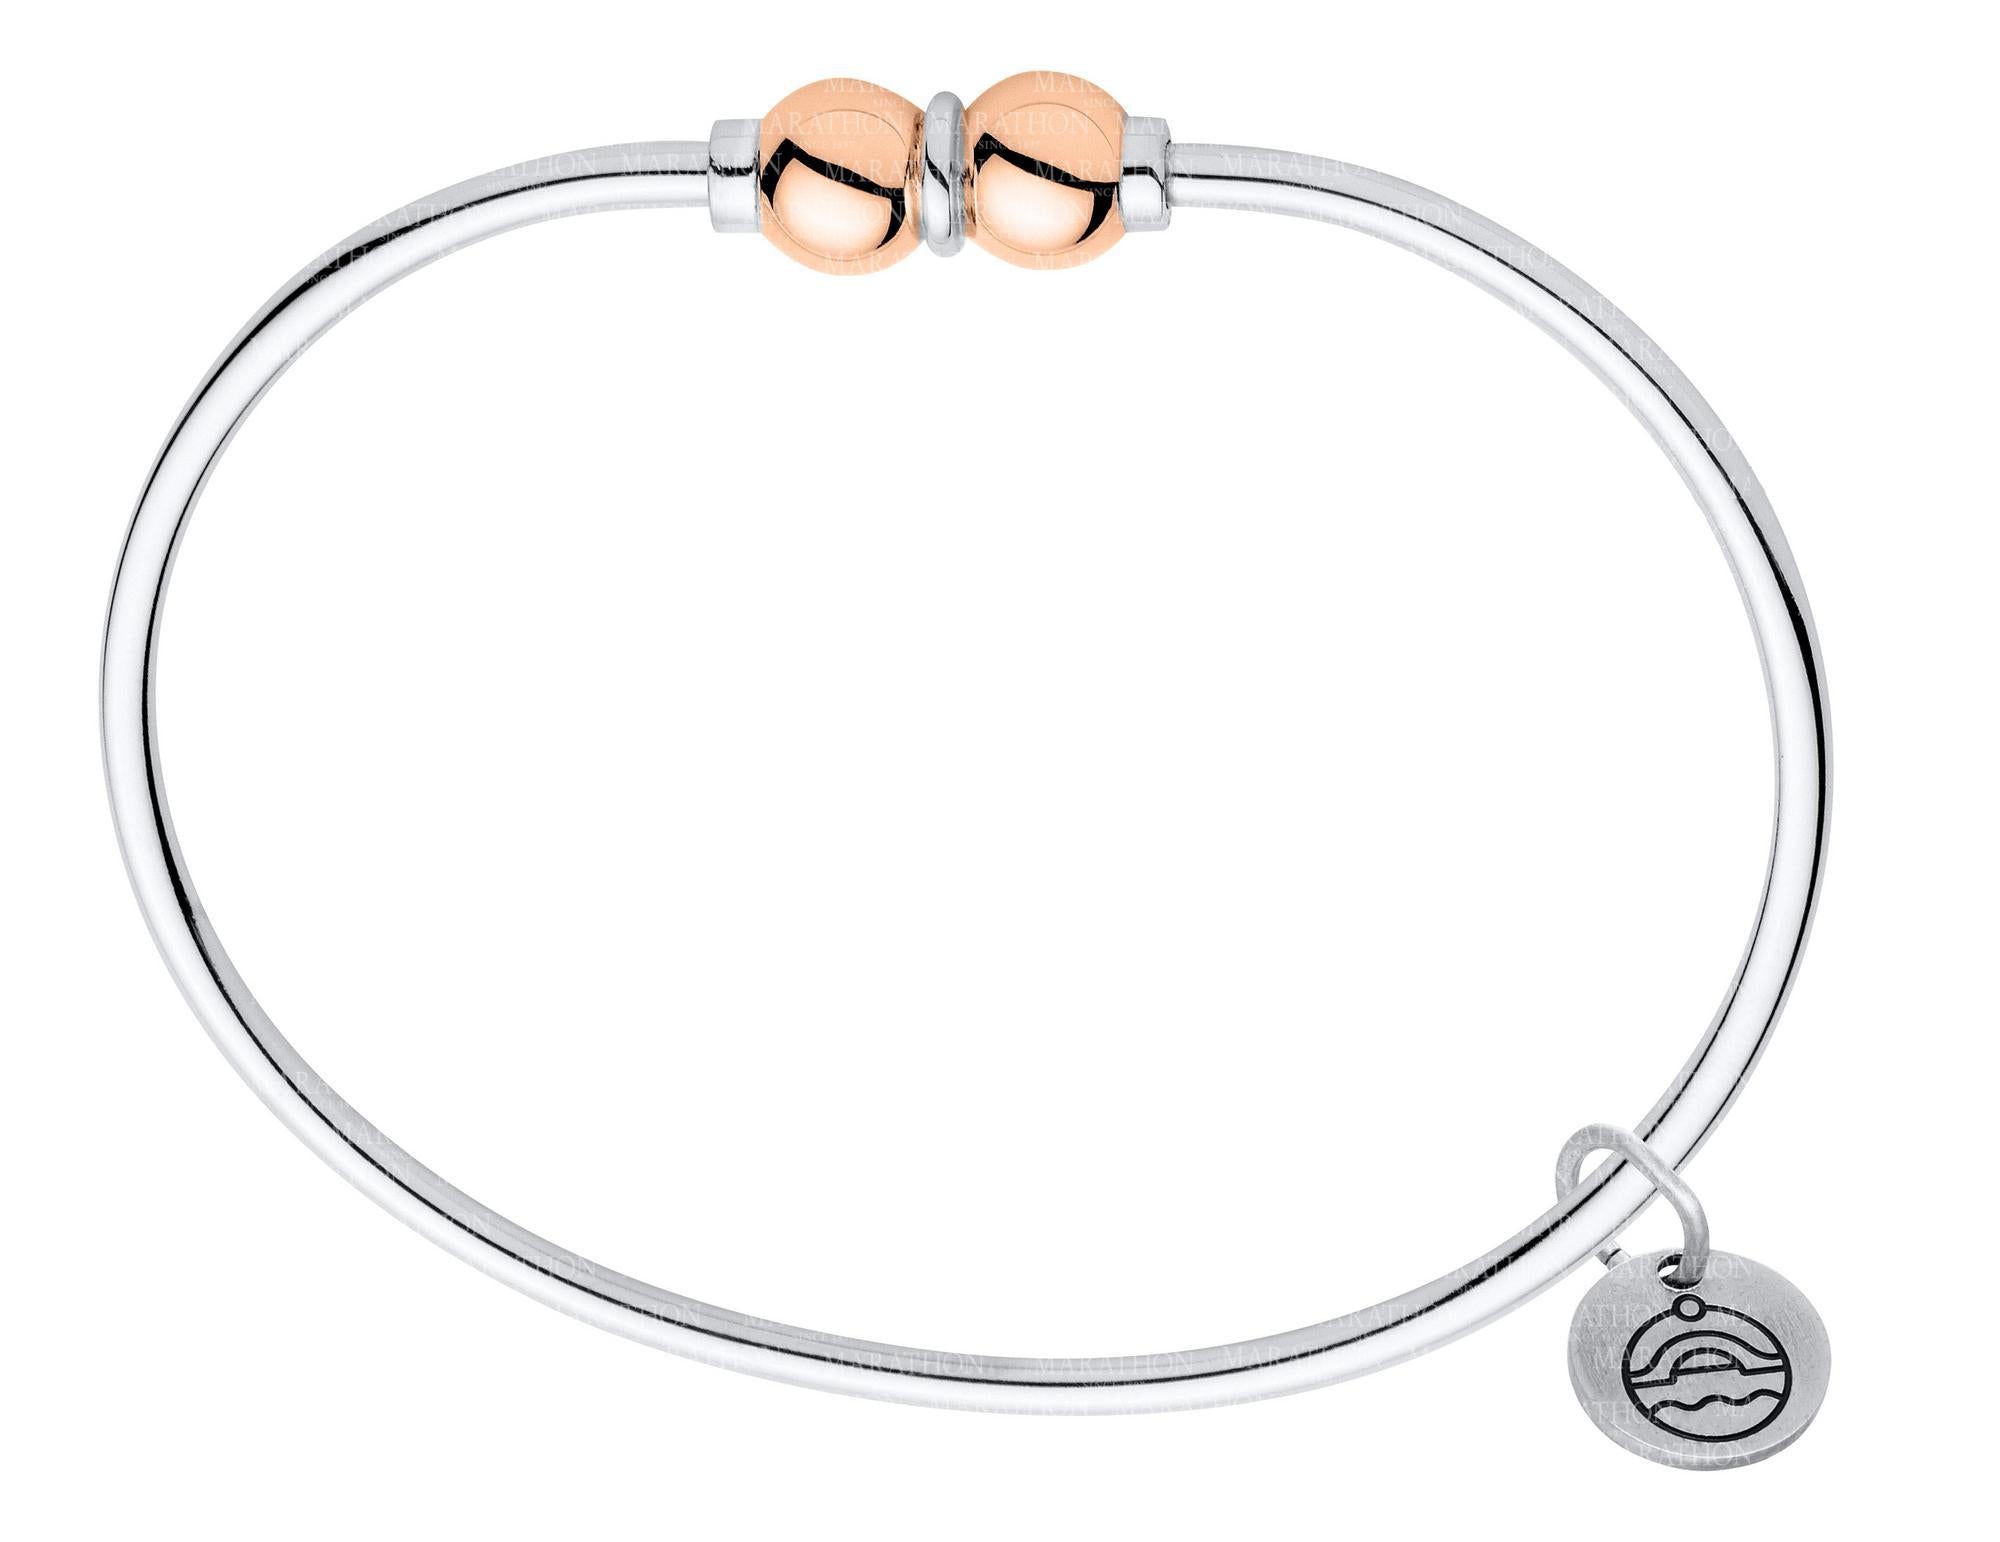 Genuine Sterling Silver Cape Cod Bracelet with Polished 14k Rose Gold Double Bead